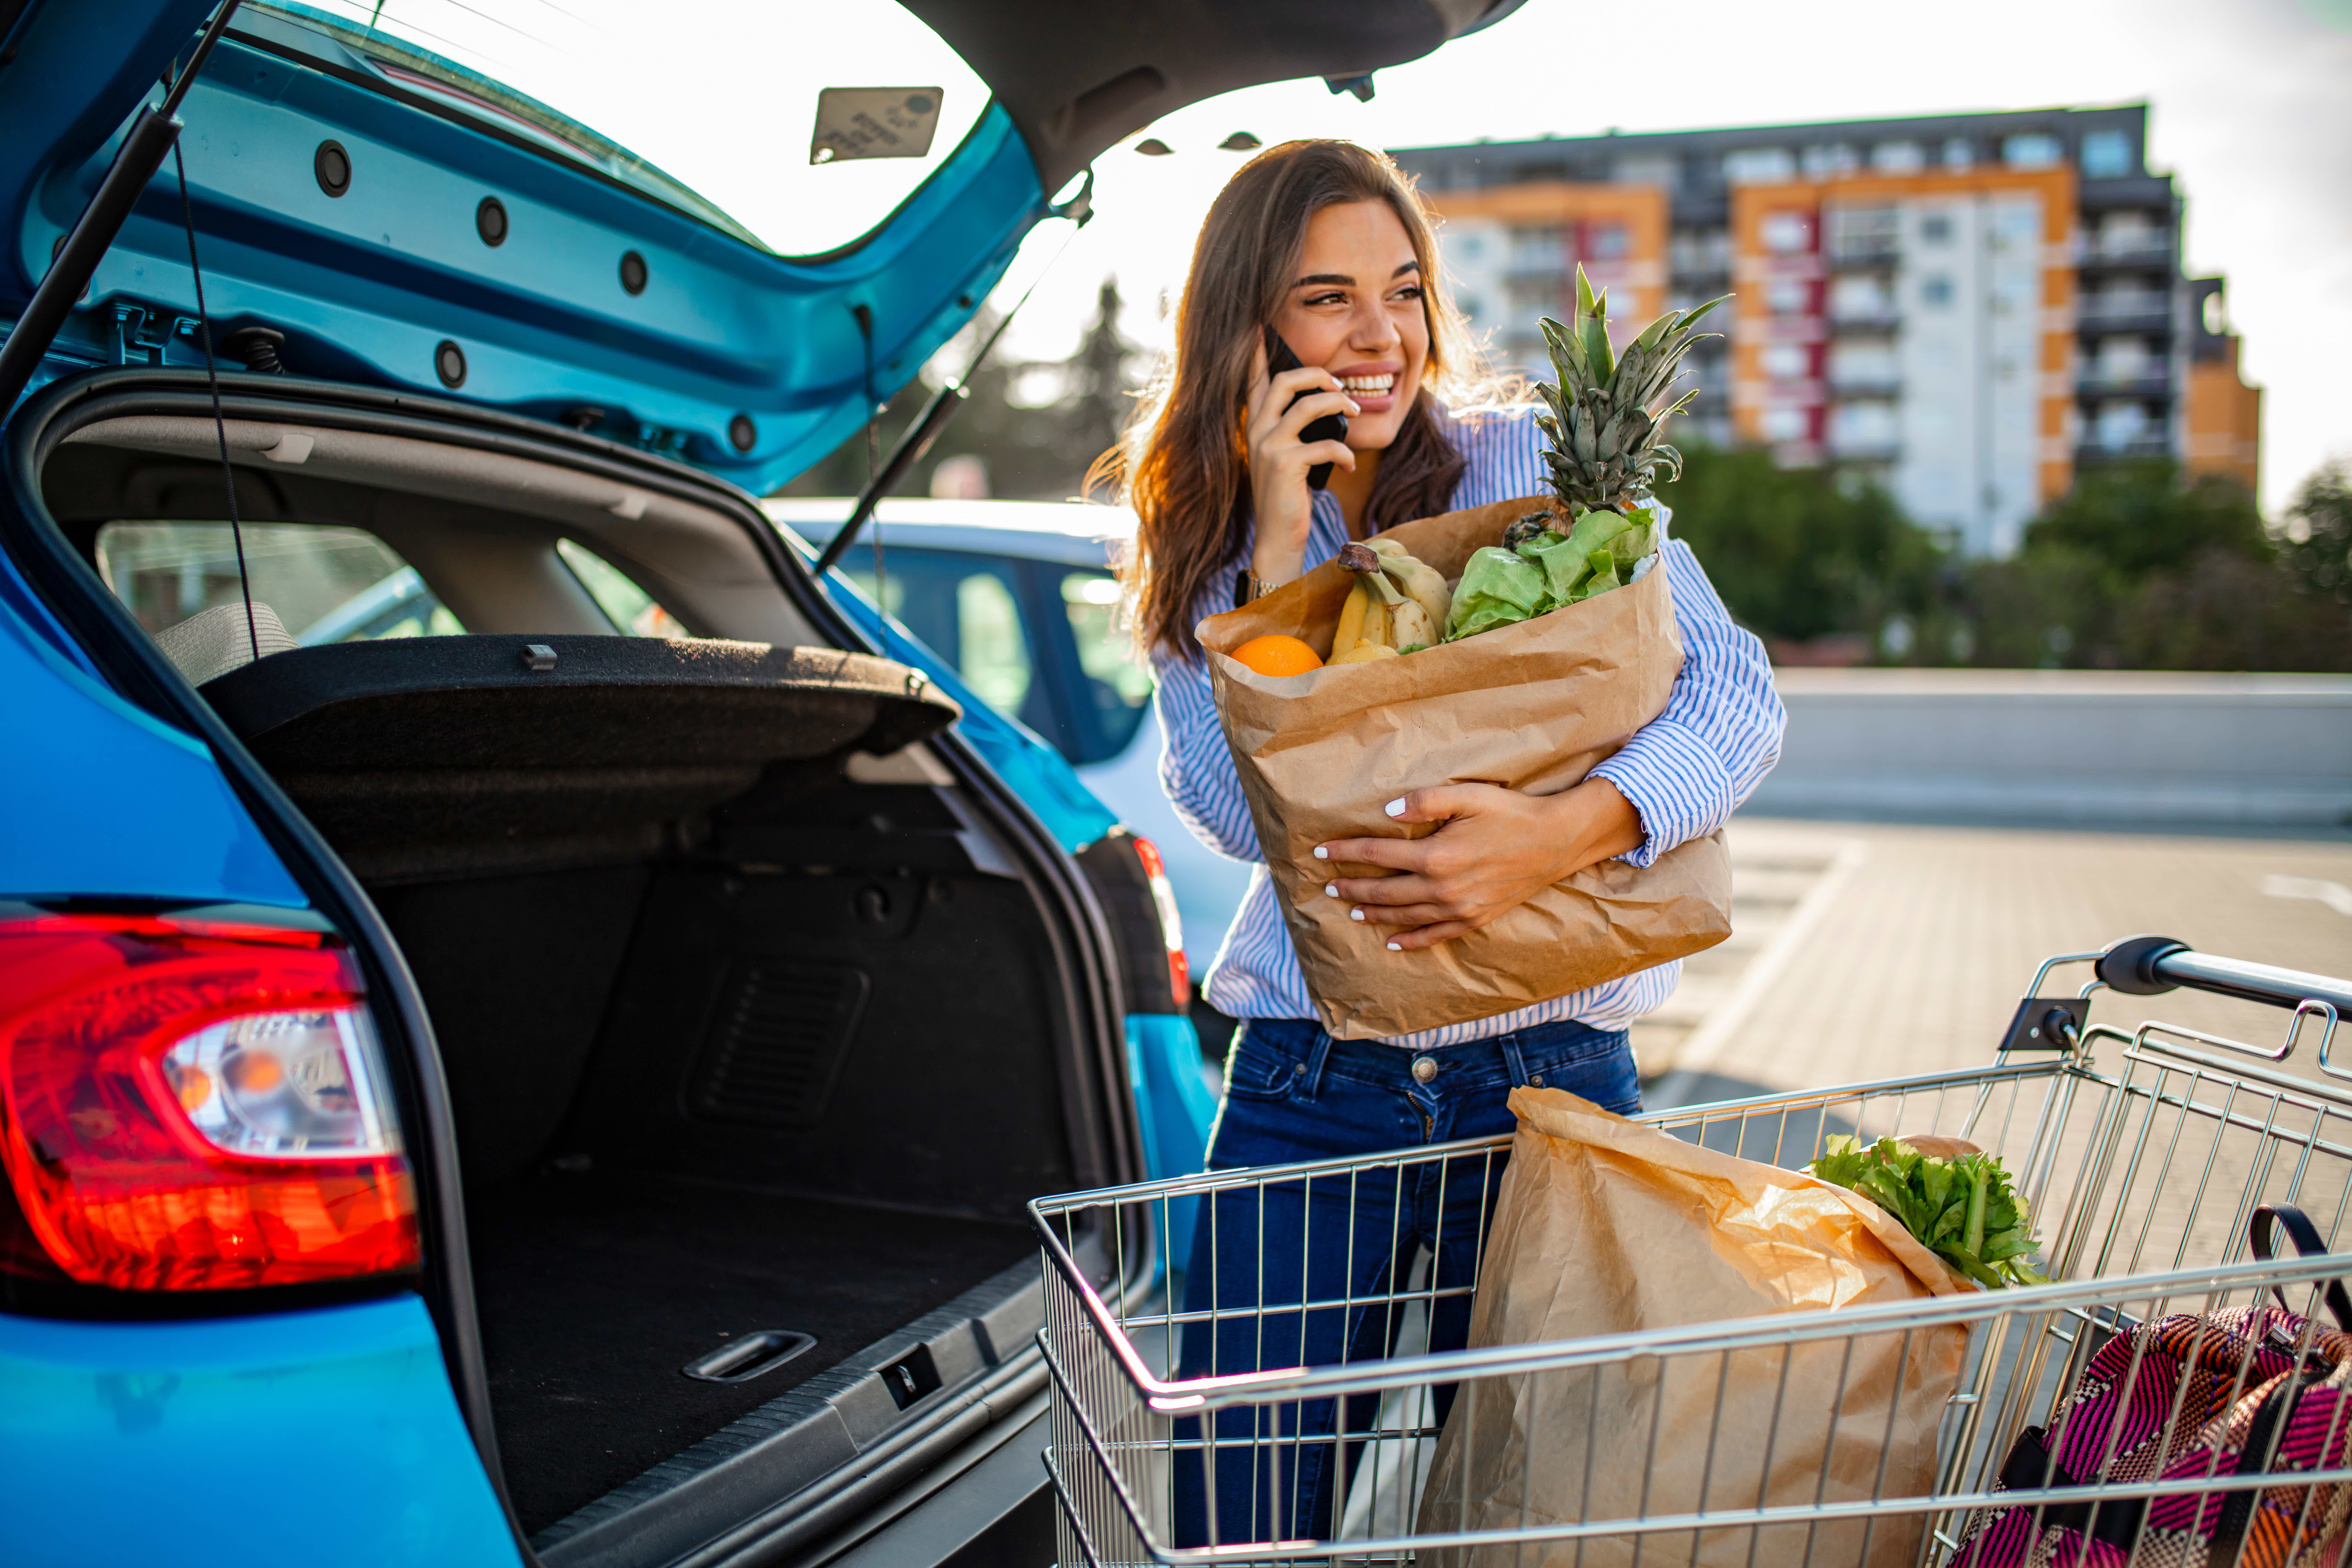 Earn a lot of cashback with your shopping cart full of groceries. Source: Adobe Stock.